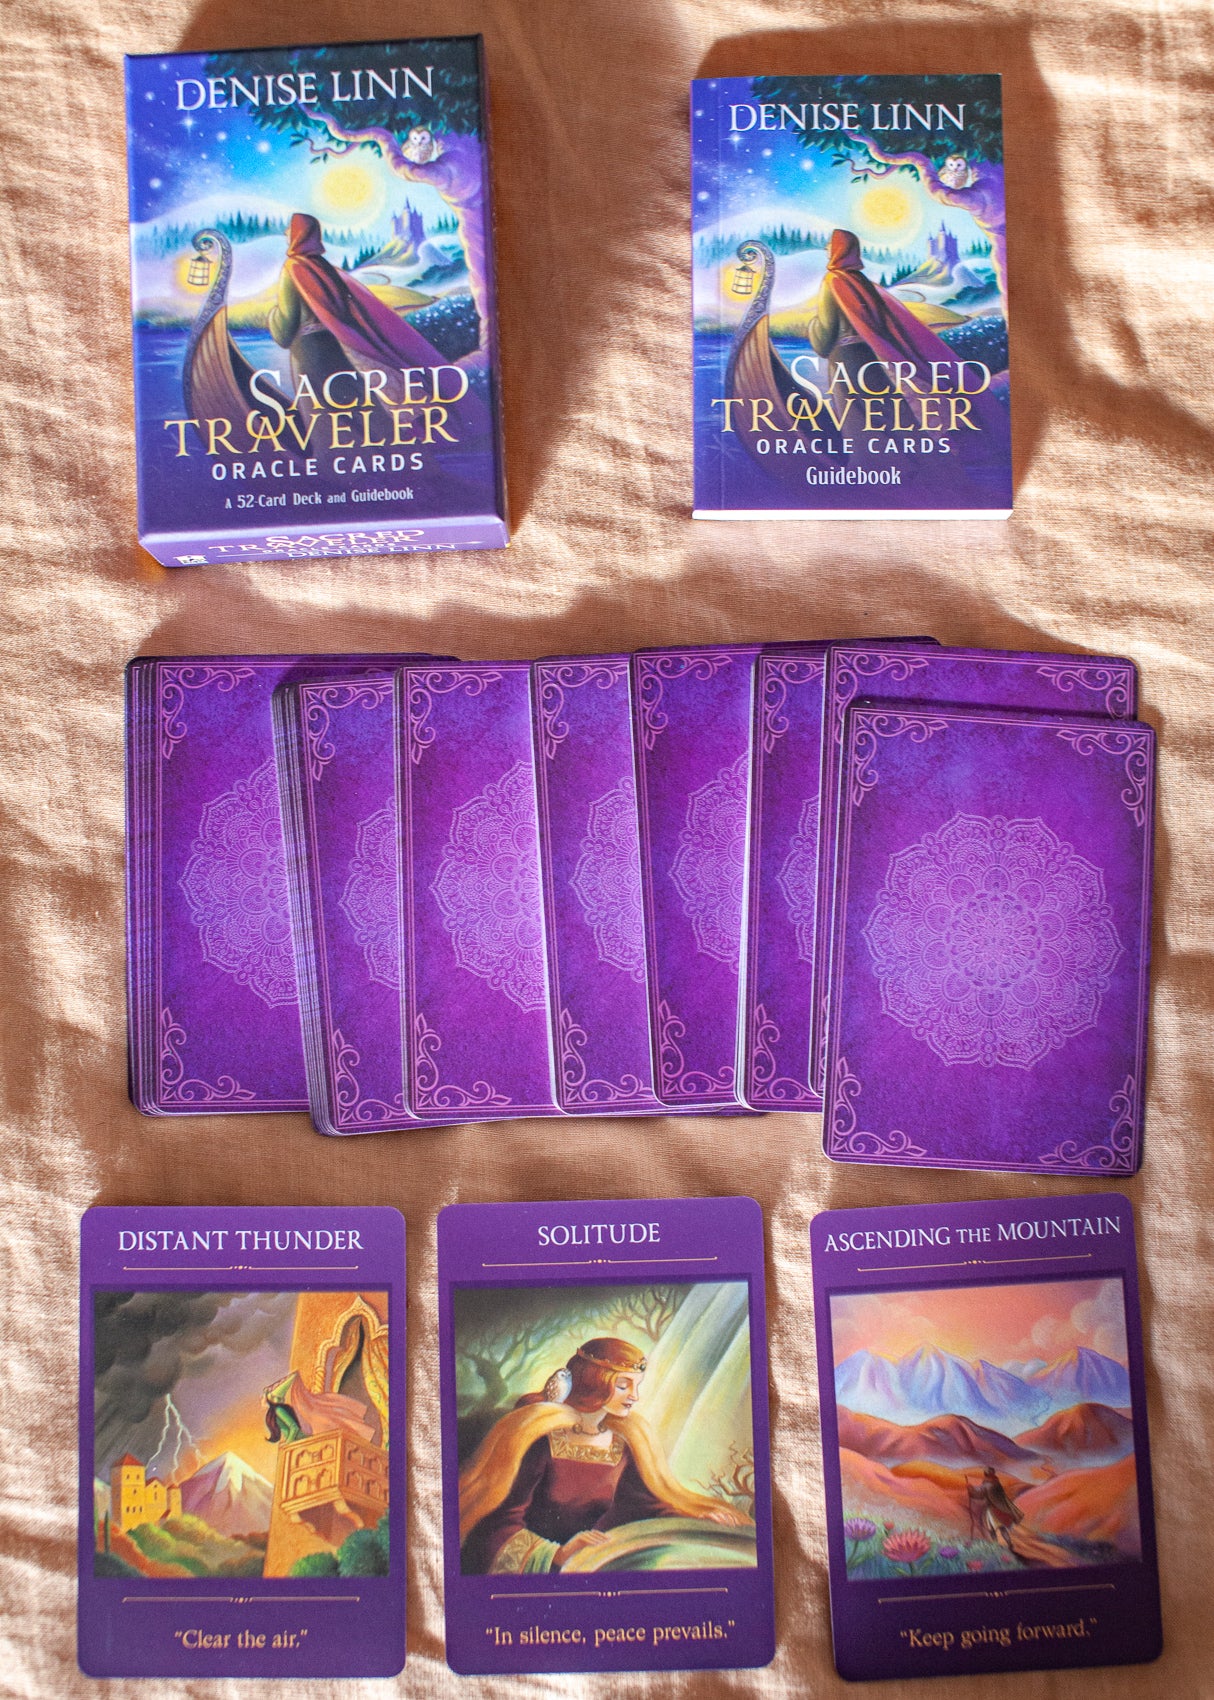 The Sacred Traveler Oracle Cards